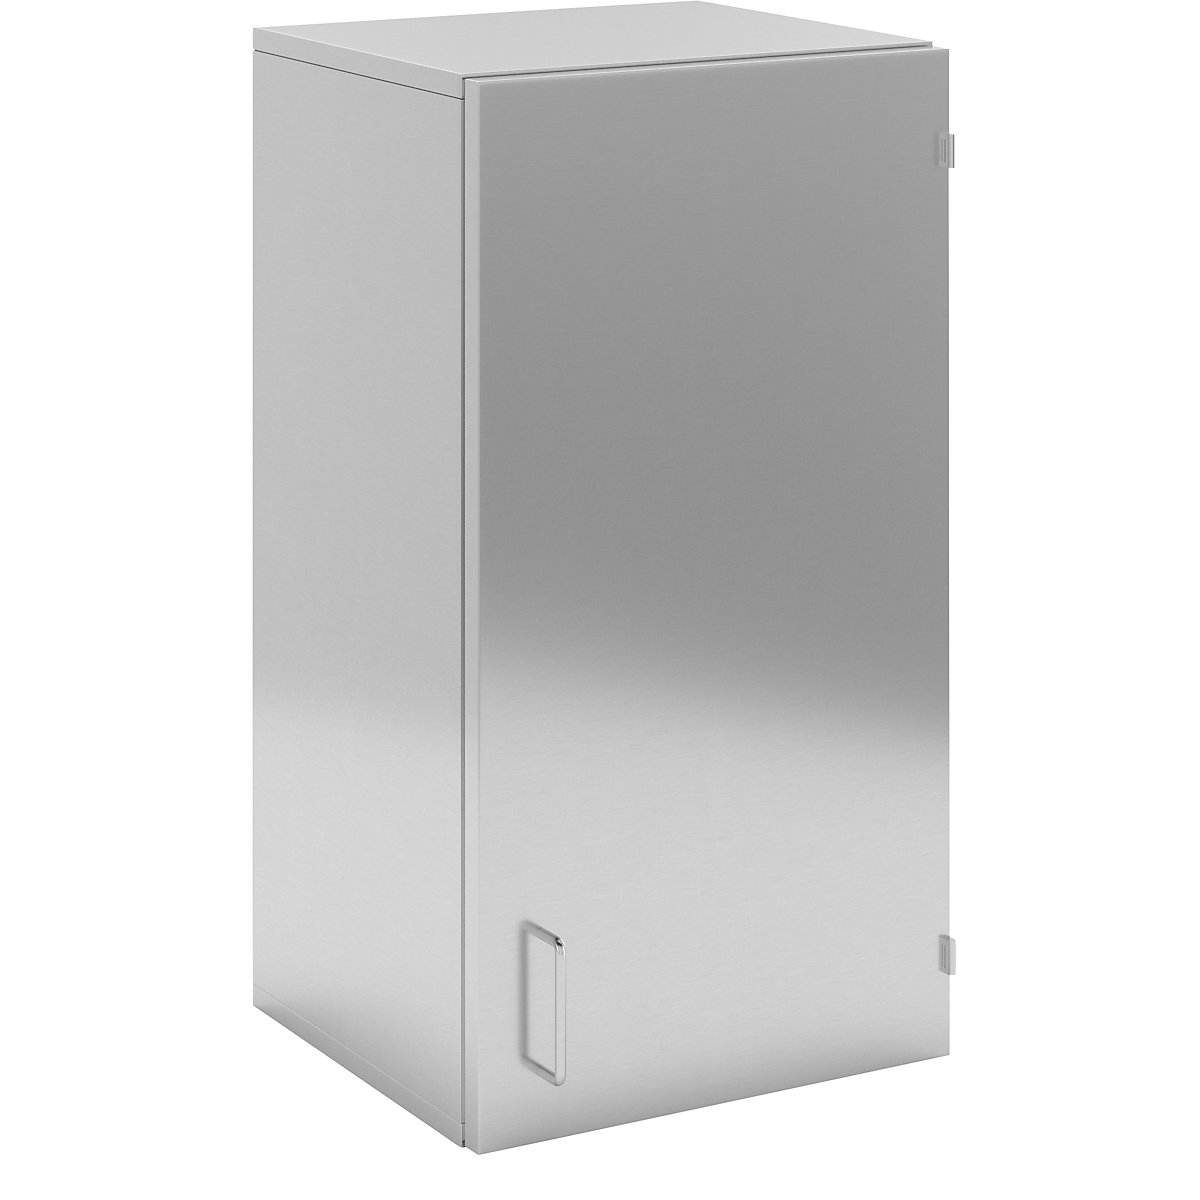 Cleanroom wall mounted cupboard made of stainless steel